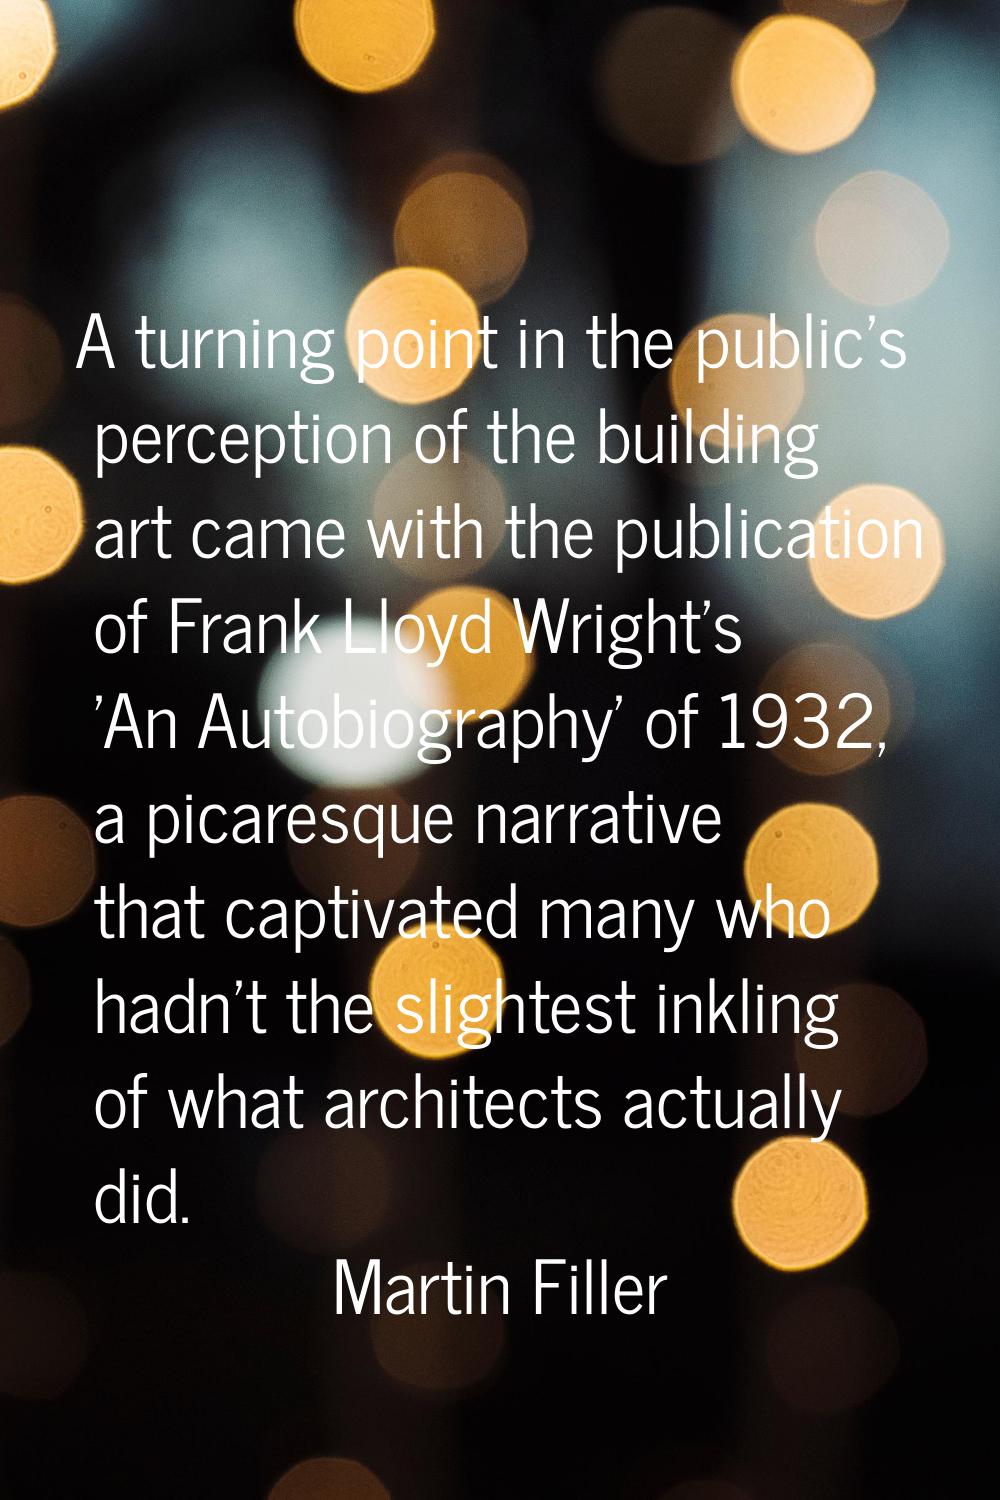 A turning point in the public's perception of the building art came with the publication of Frank L